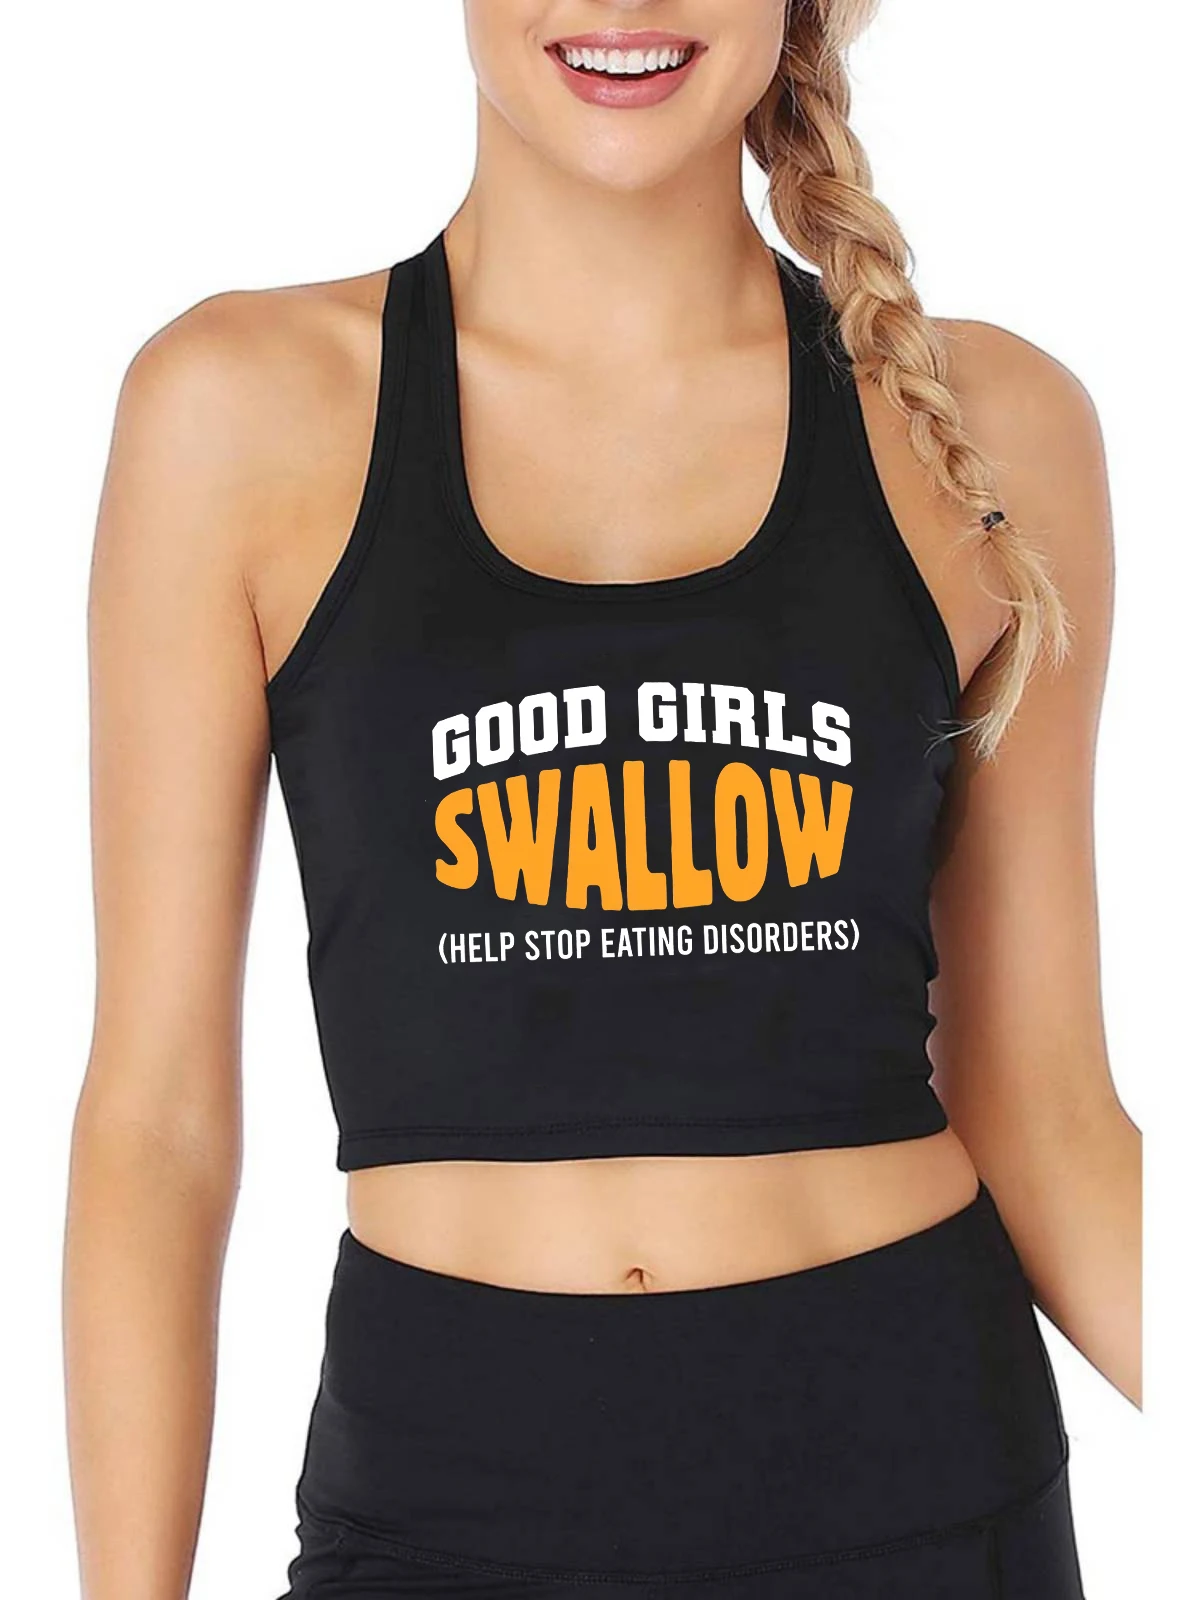 

Good Girls Swallow Help Stop Eating Disorders Design Crop Top Hotwife Funny Flirting Slim Fit Tank Tops Swinger Sexy Camisole